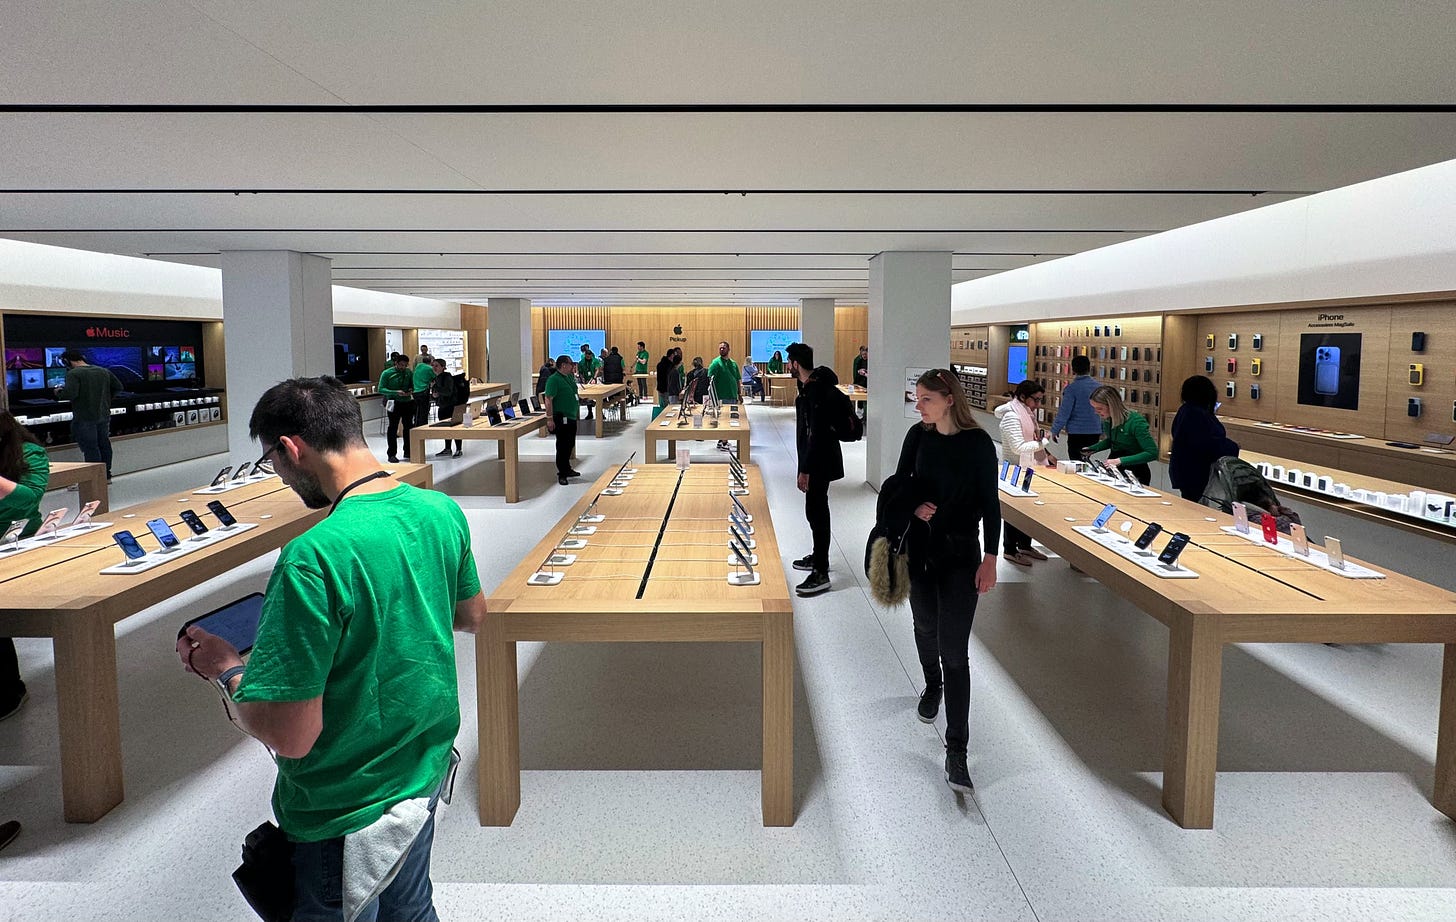 The interior of Apple Parly 2 photographed from the front of the store. In the foreground are tables and in the background is an Apple Pickup counter.